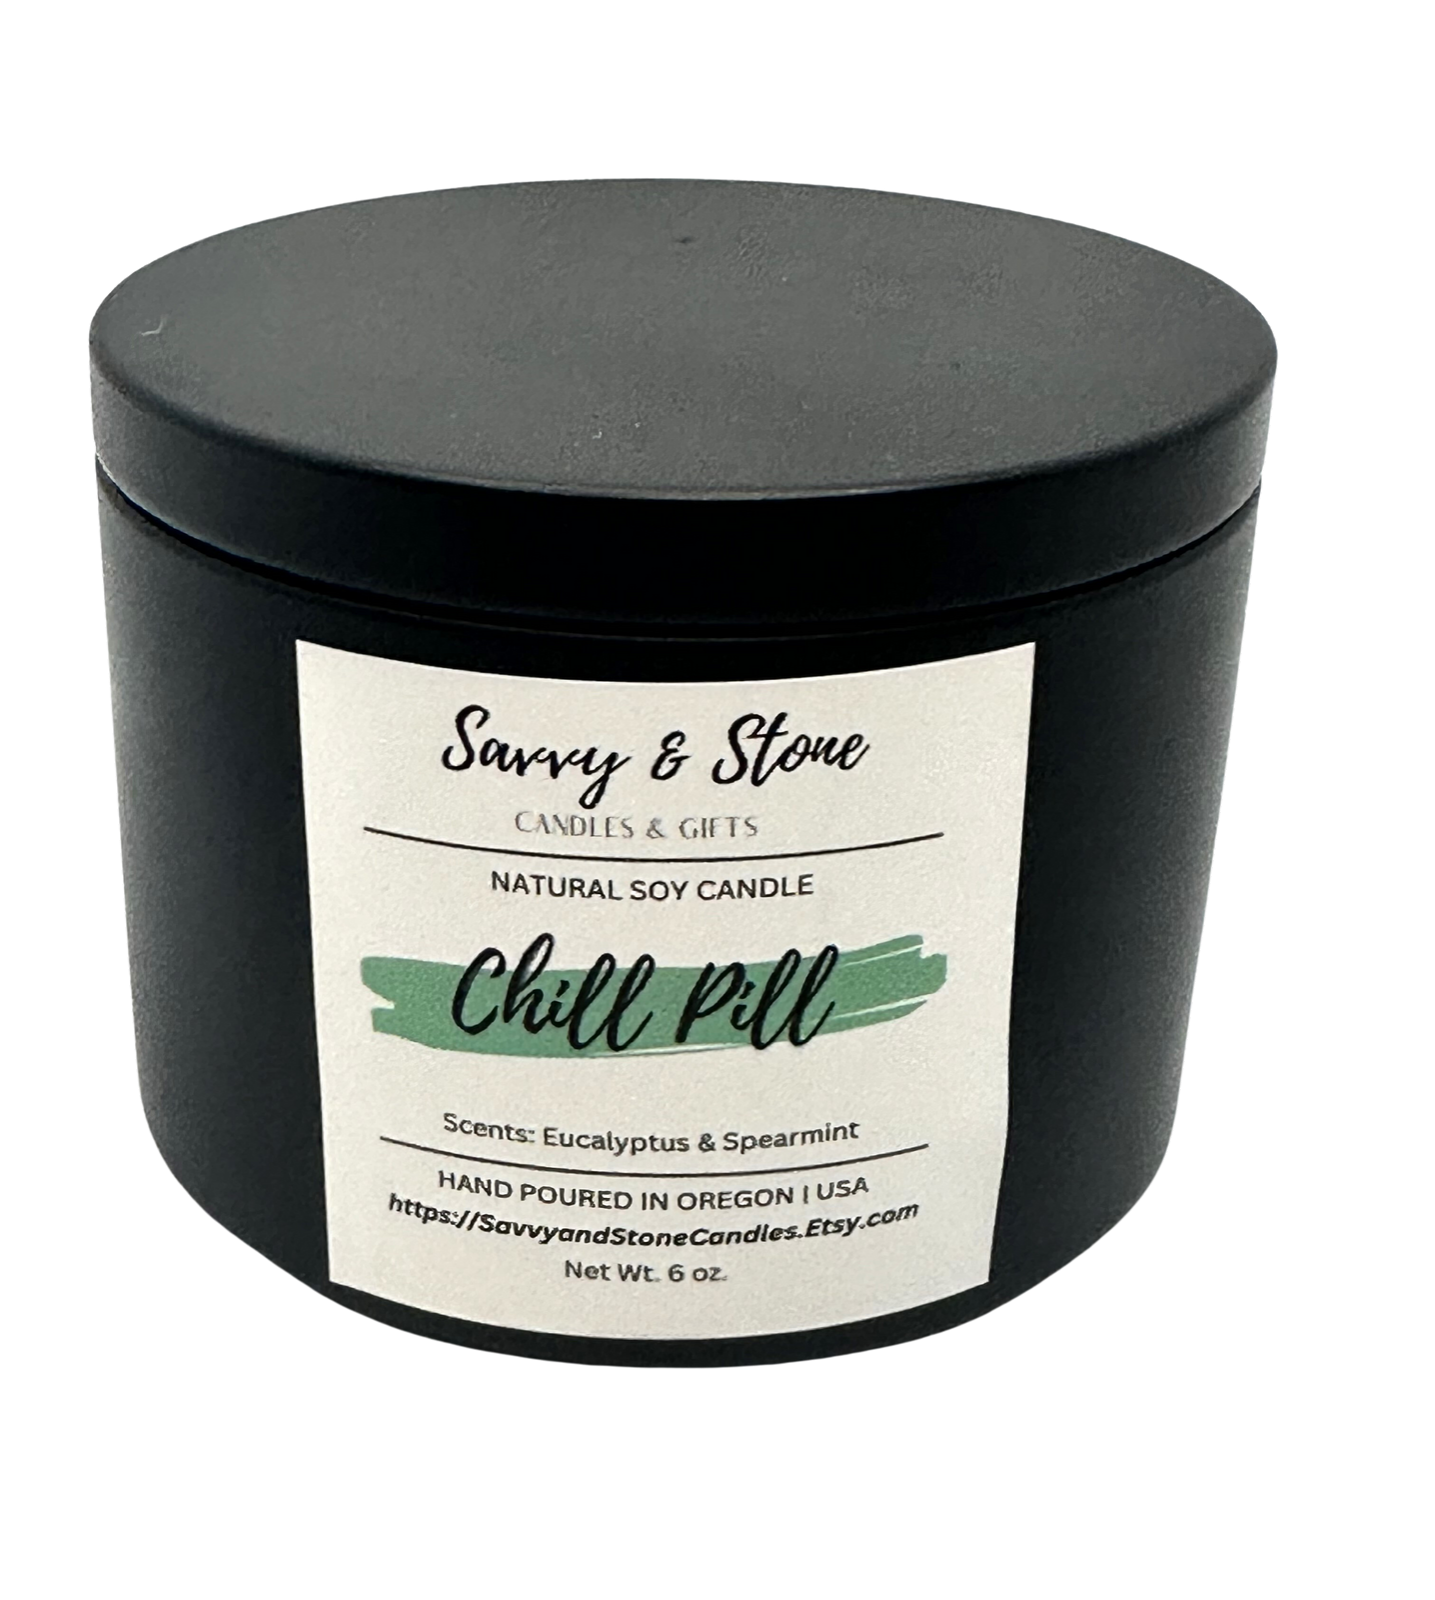 Spearmint & Eucalyptus "Chill Pill" / 6oz Wooden Wick Candle in Premium Tin (Free shipping over $35)